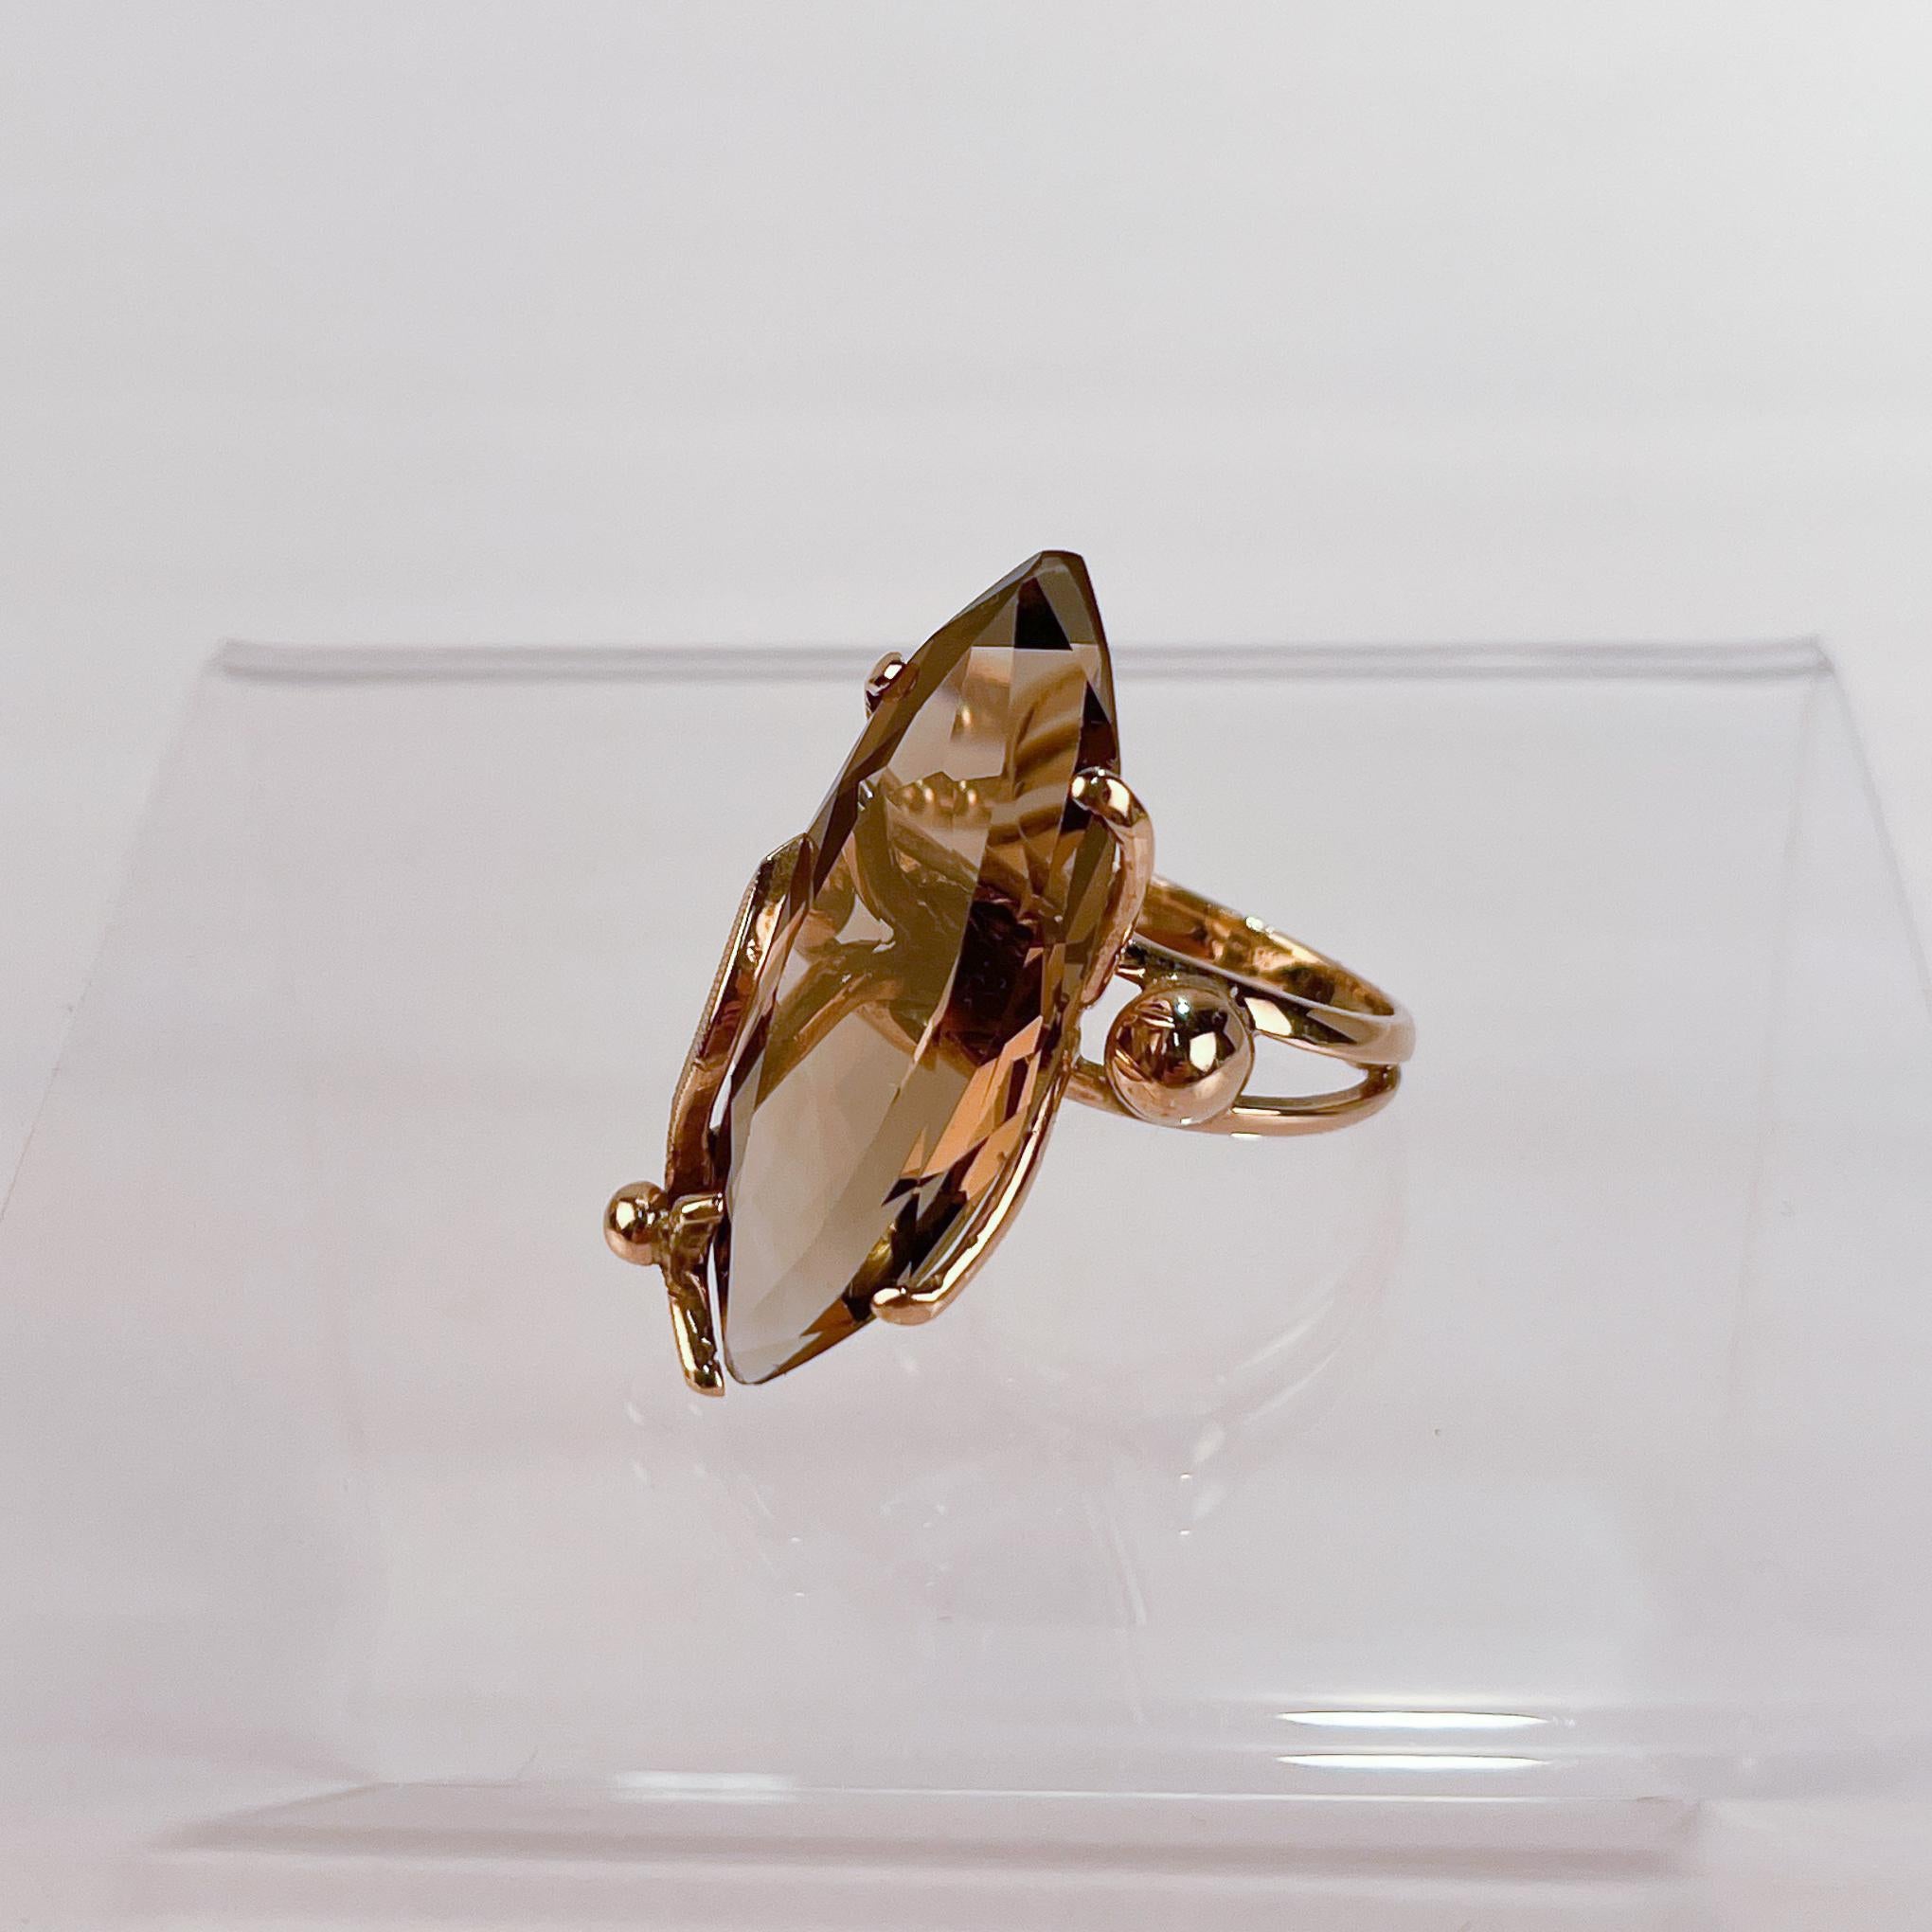 A very fine Modernist 14k gold and smoky quartz cocktail ring.

With a large faceted marquise shaped smoky quartz gemstone prong-set in 14k gold. 

The ring's split shank is made of two wires with two half gold beads that flank the stone.

Simply a